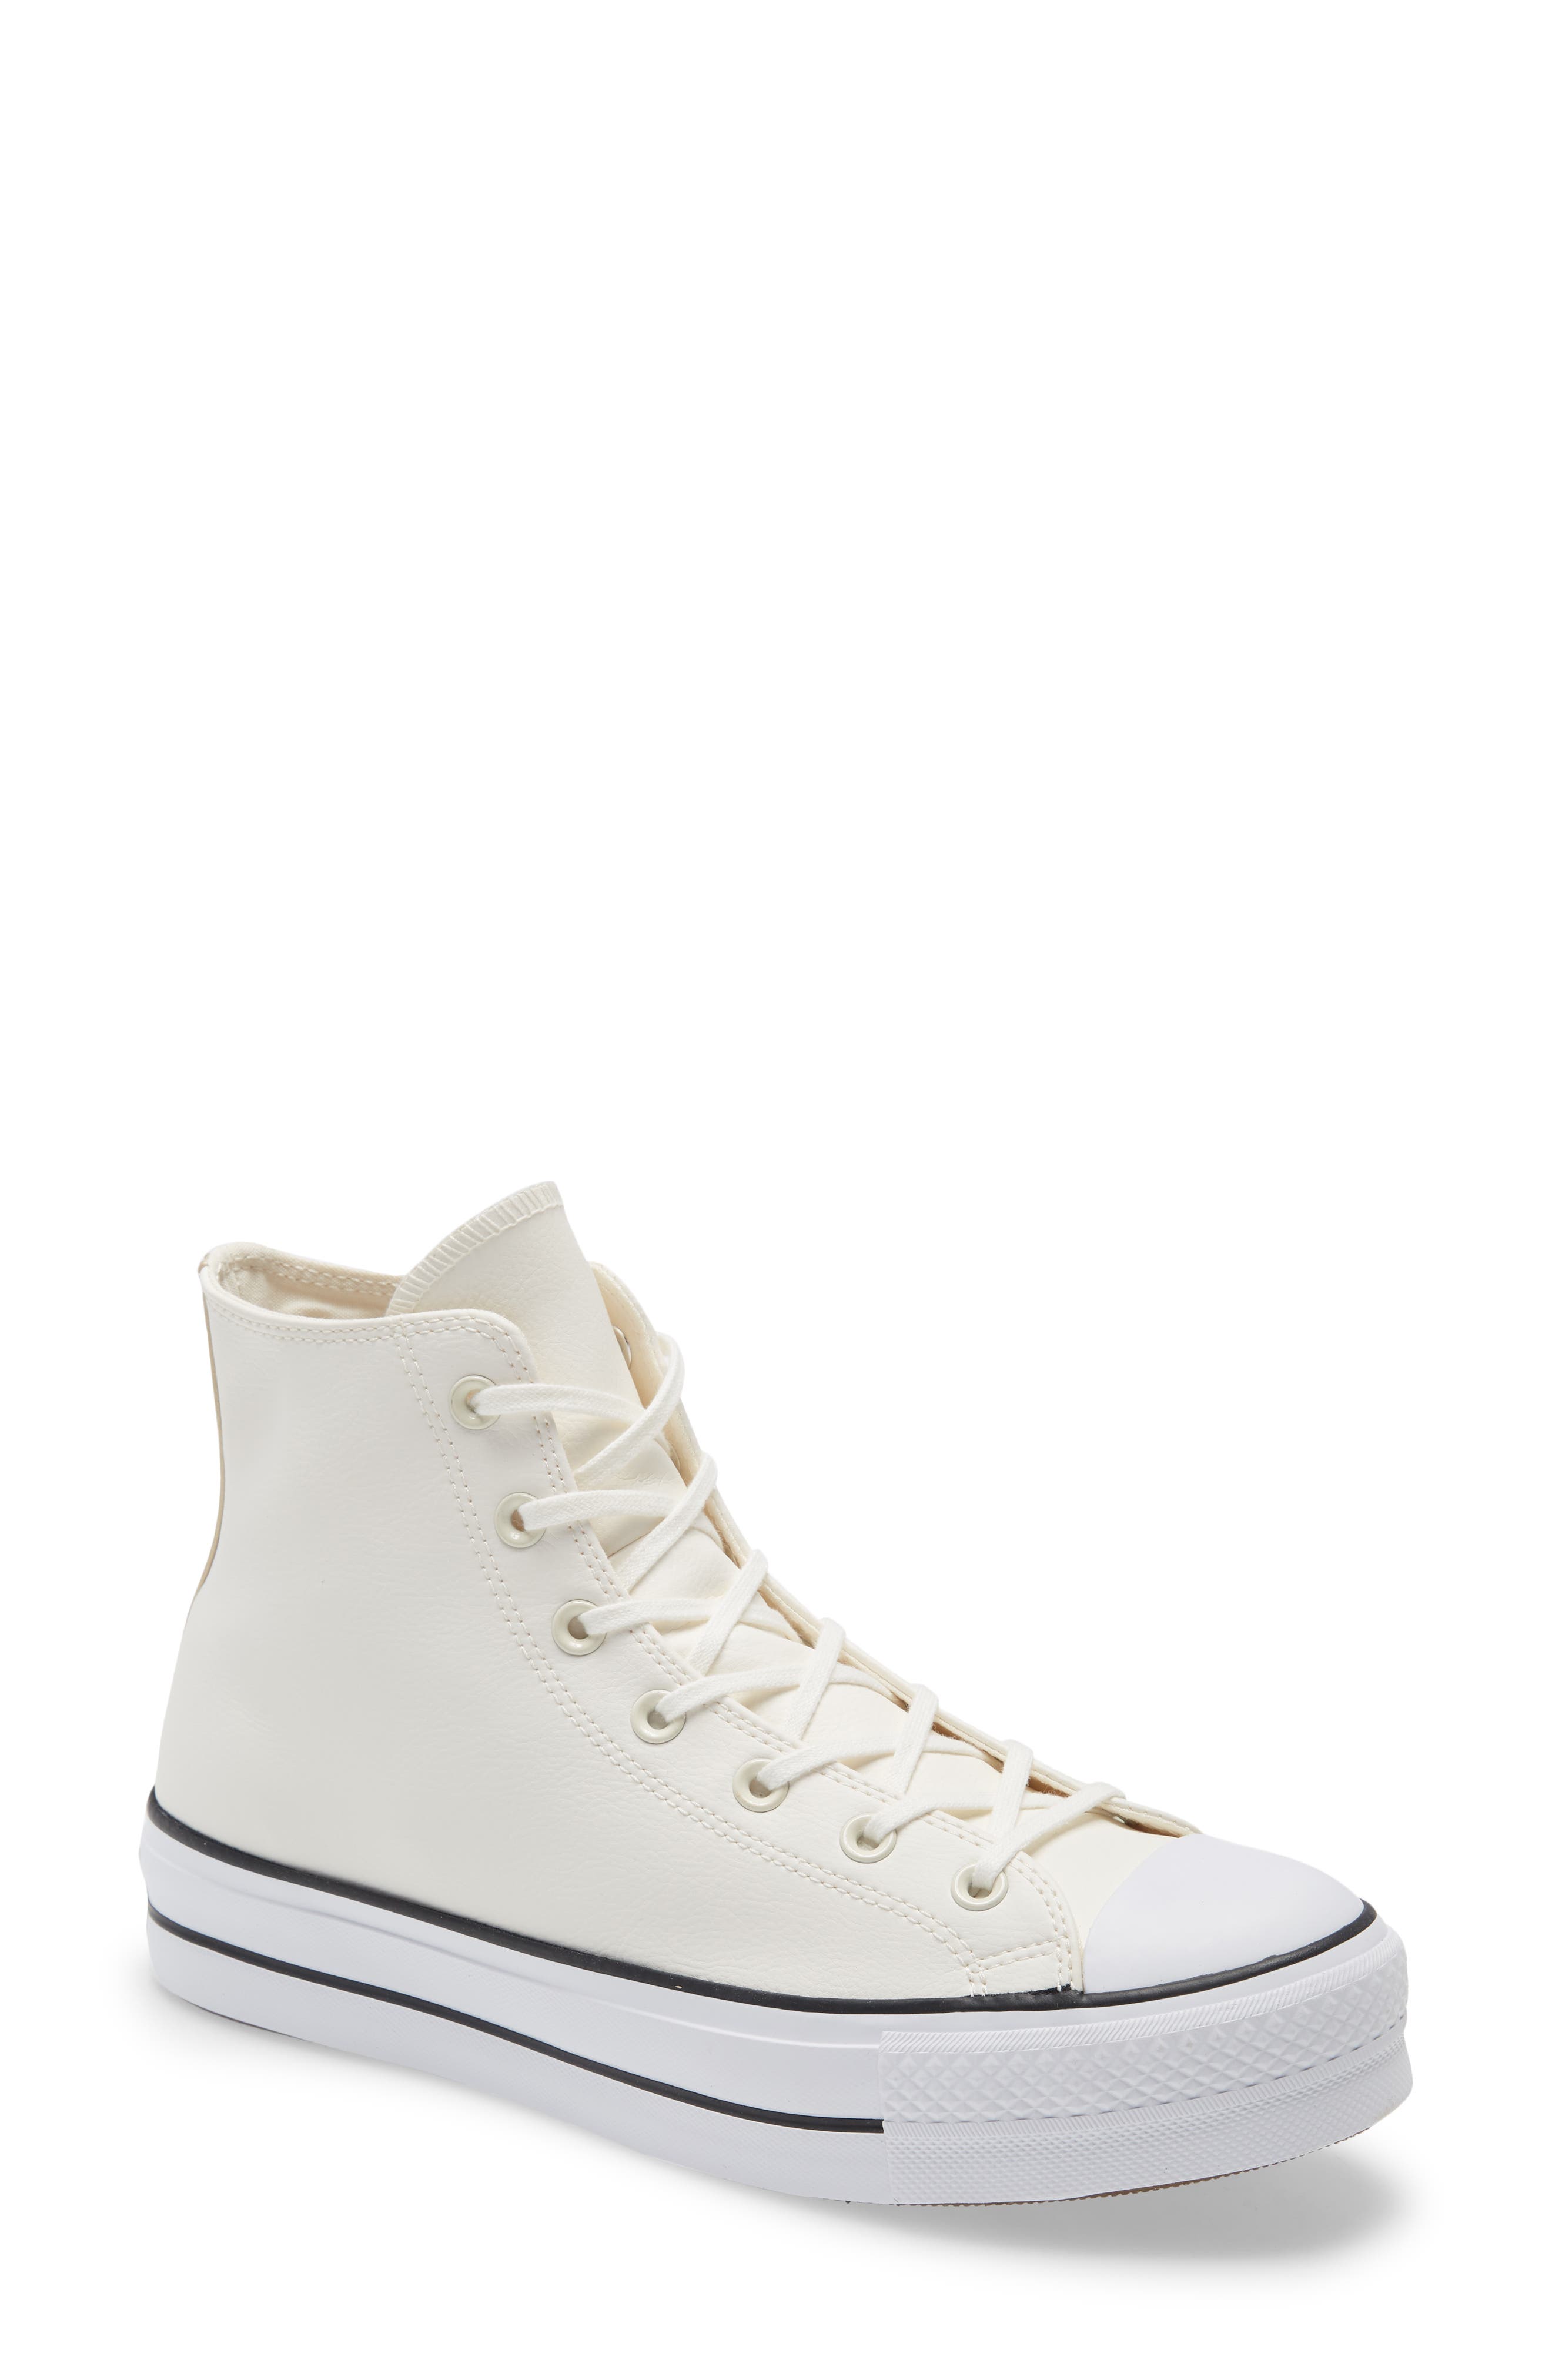 Off-White Converse | Nordstrom